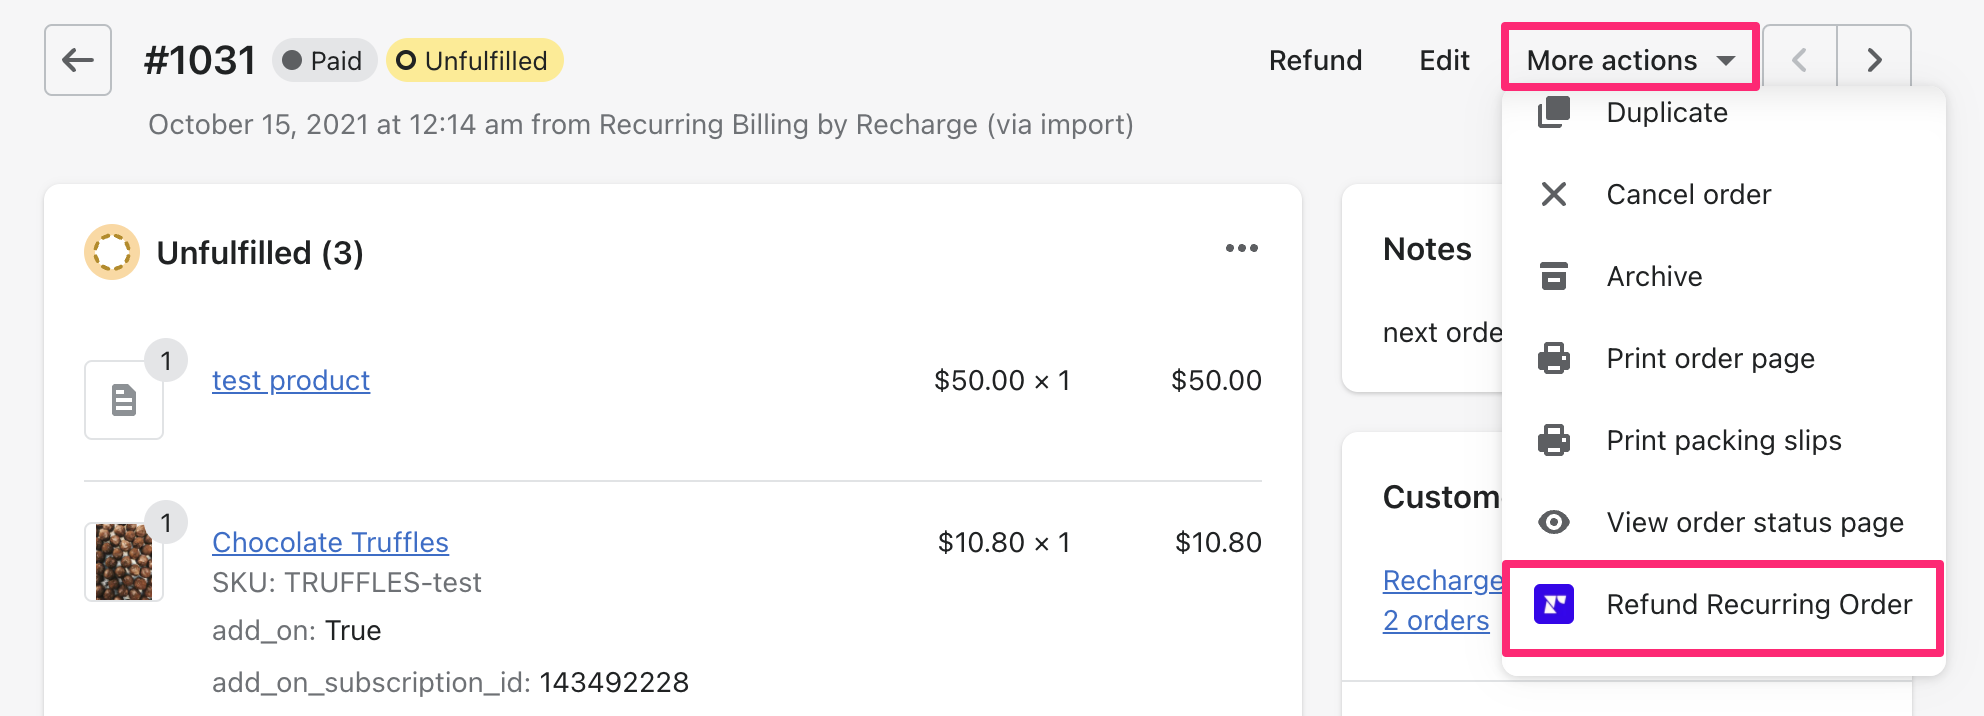 Shopify order page showing the option to refund the recurring subscription order in Recharge